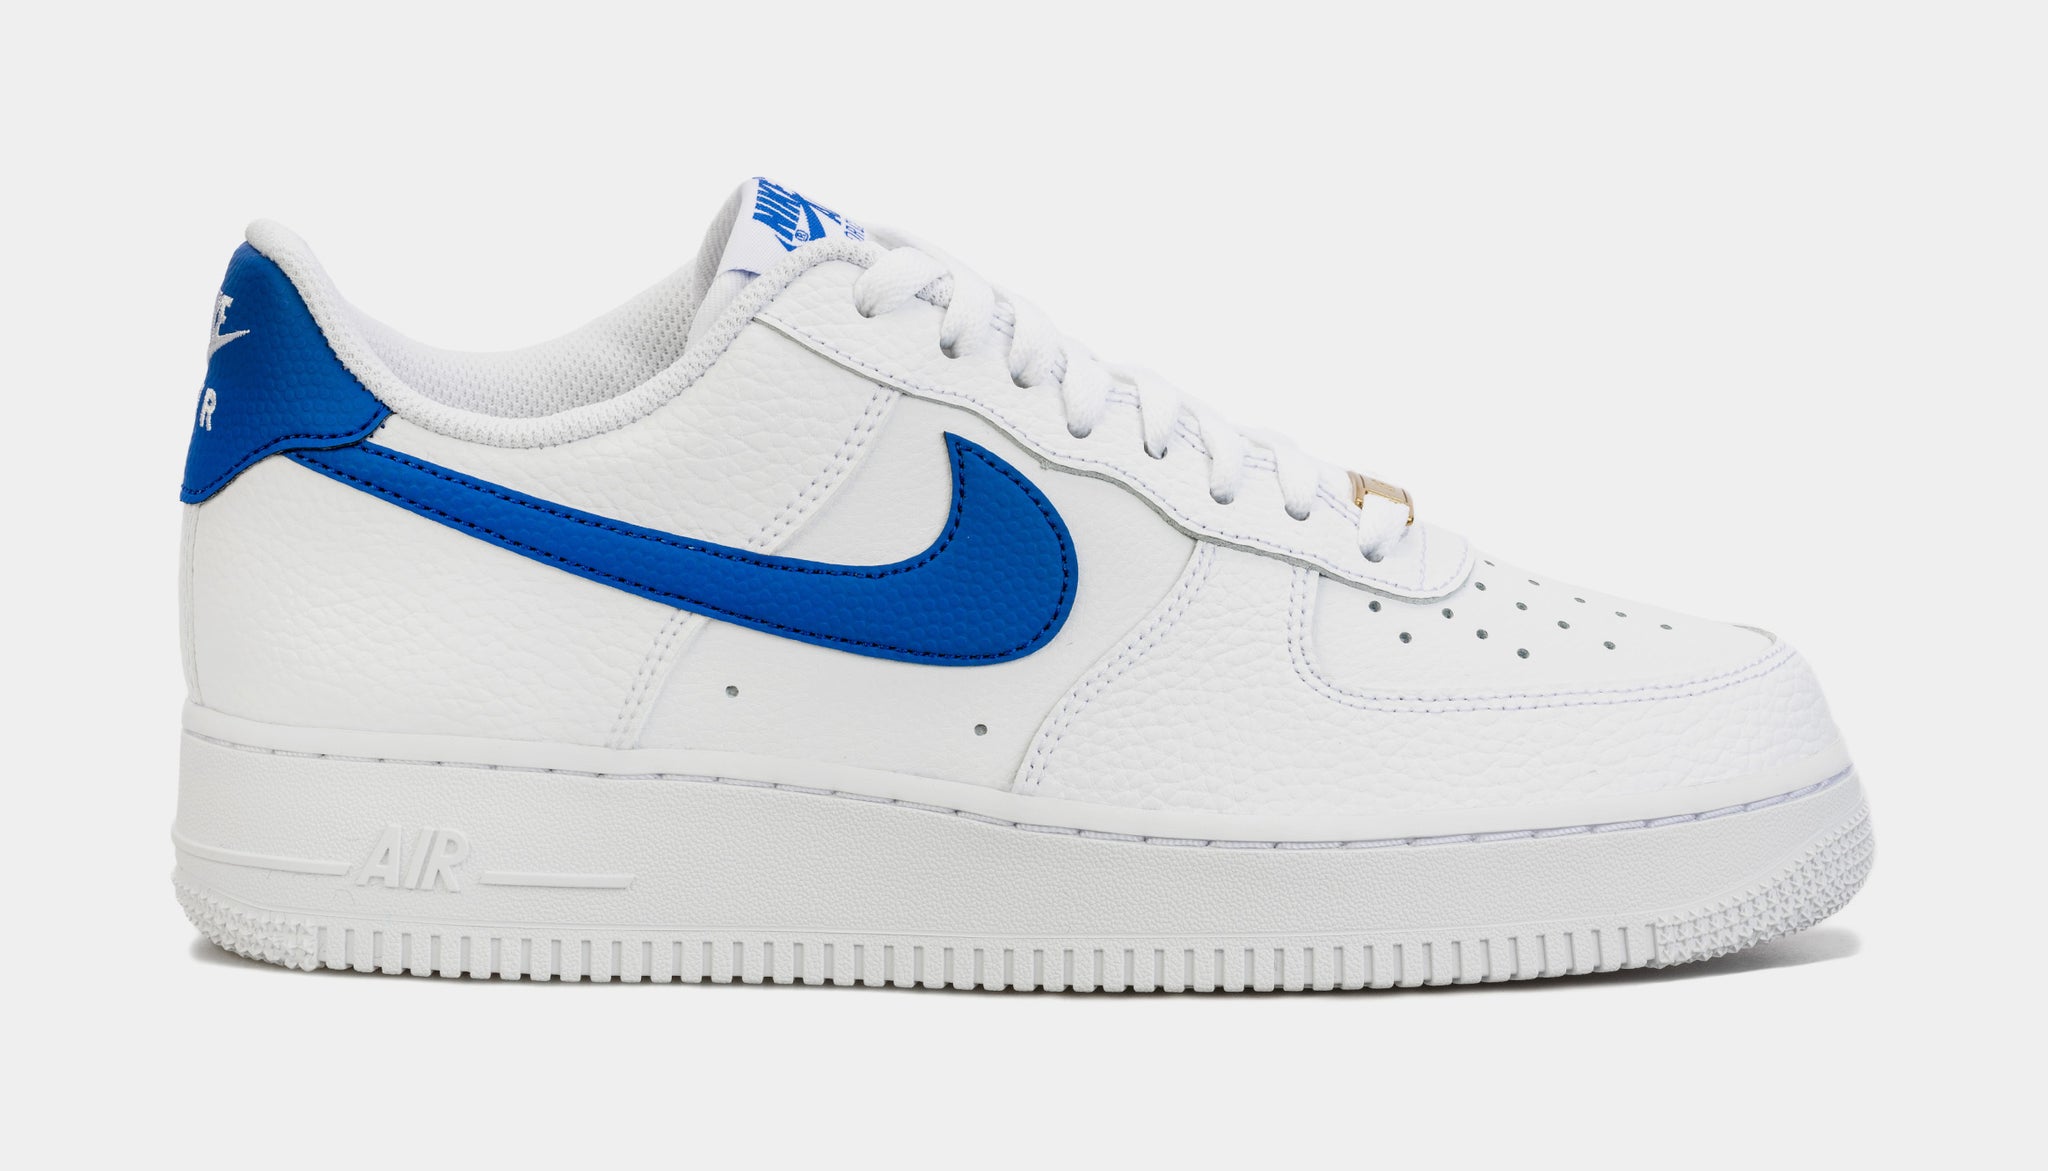 Mens Air Force 1 Low Top Shoes.